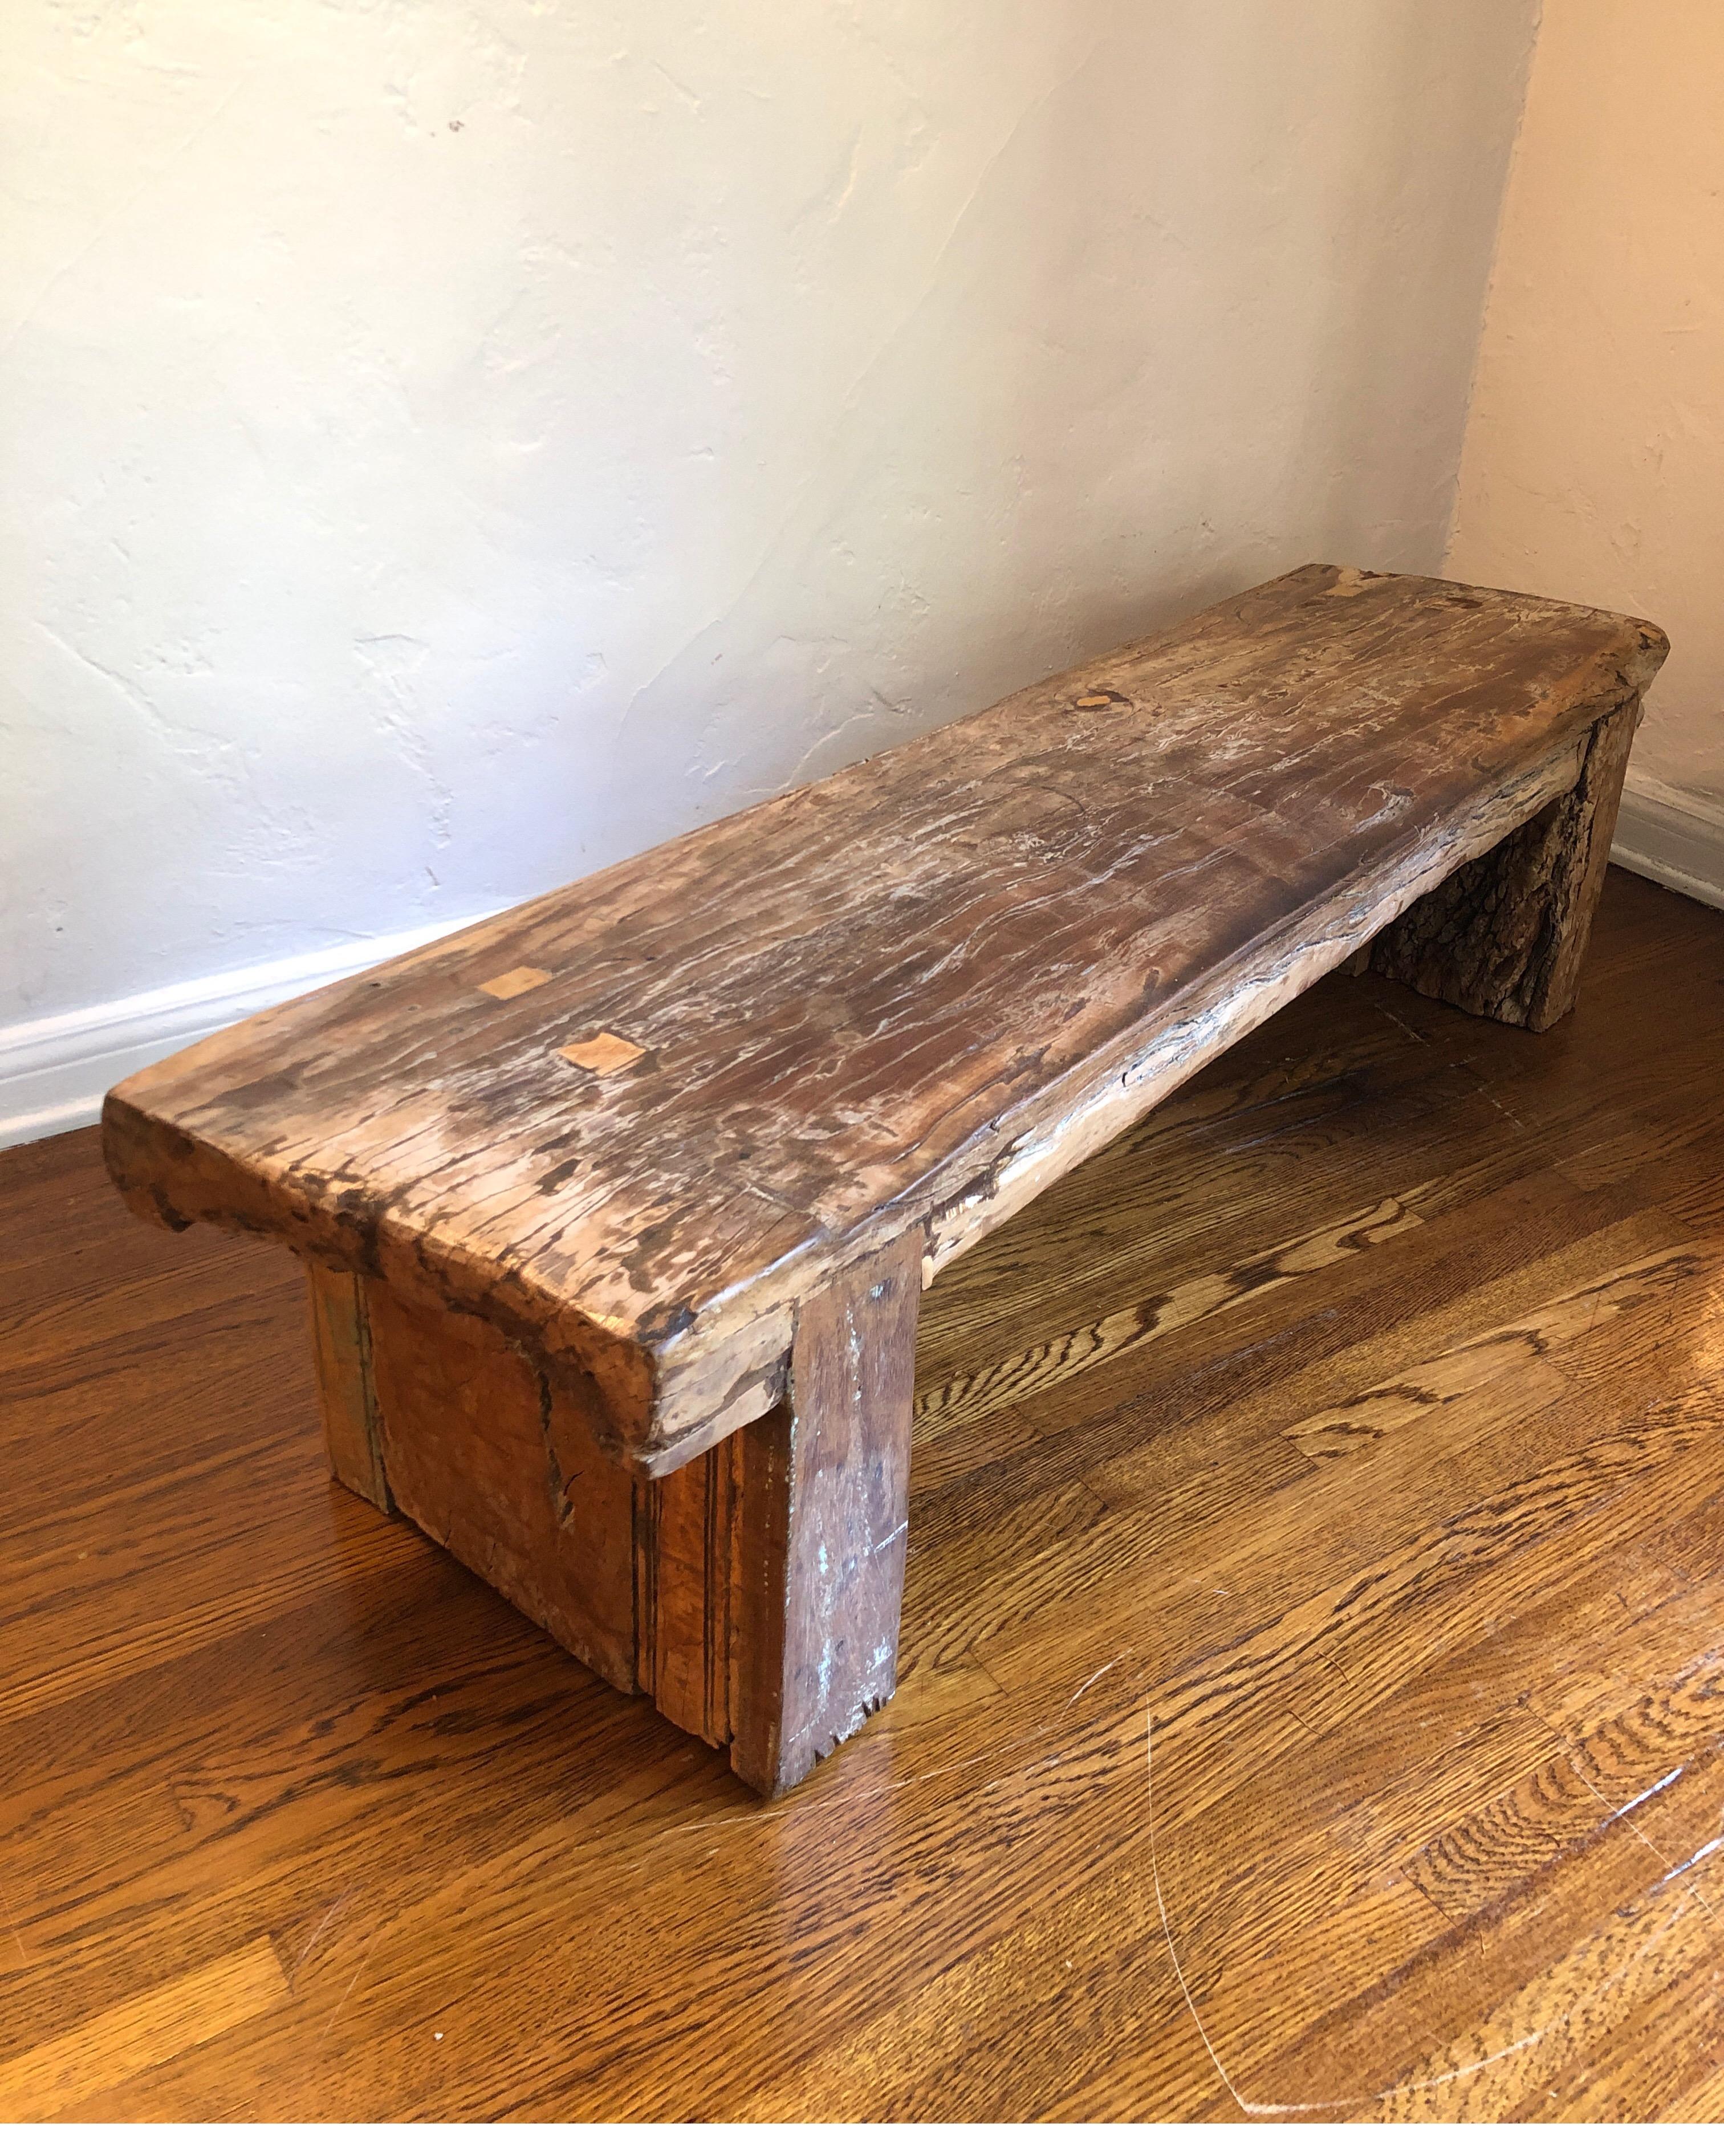 Very solid and heavy piece. Thick reclaimed wood log (possibly teak) turned into Primitive style modern bench.
Gorgeous veins with a petrified wood look. This is very old wood, but we believe it to be made more recently. Very heavy.

Entry bench